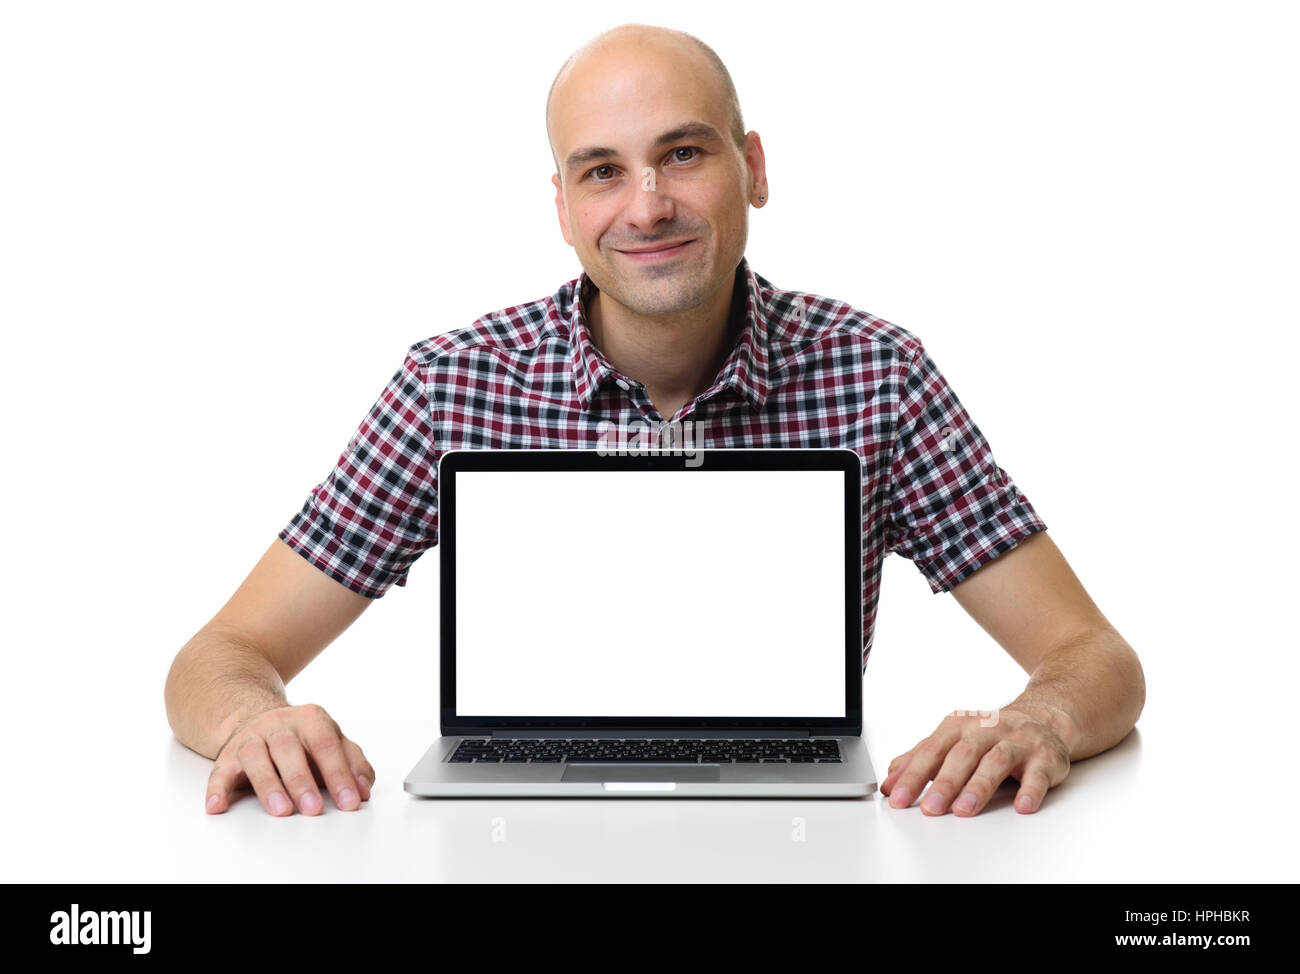 mid age bald man sitting at desk and using laptop. Blank screen with copy space. Isolated on white background Stock Photo